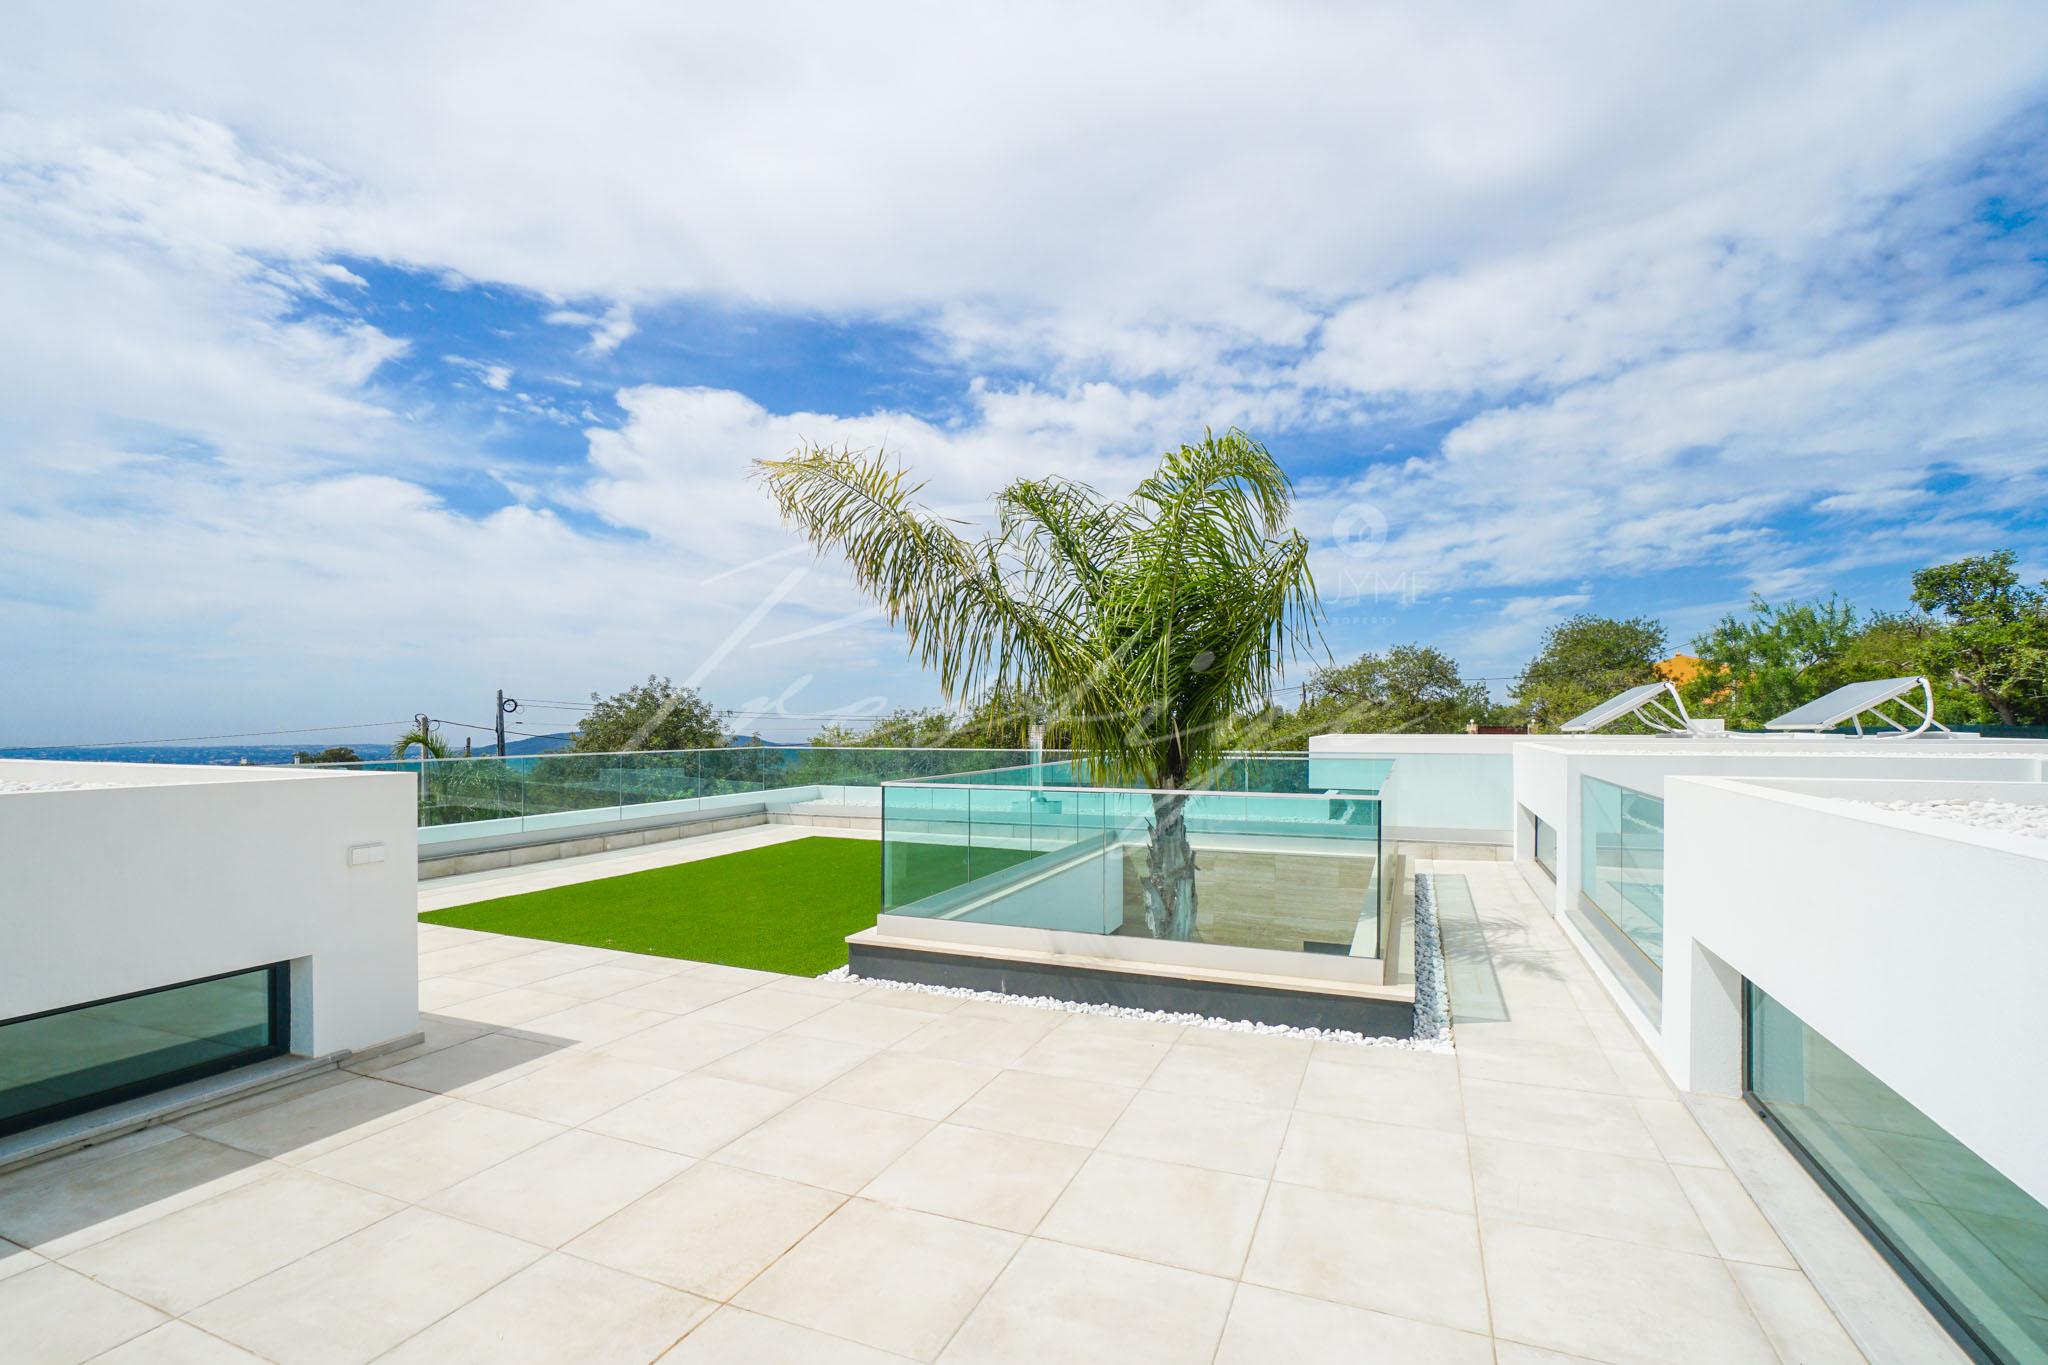 Excellent exclusive 4 bedroom villa with modern finishings